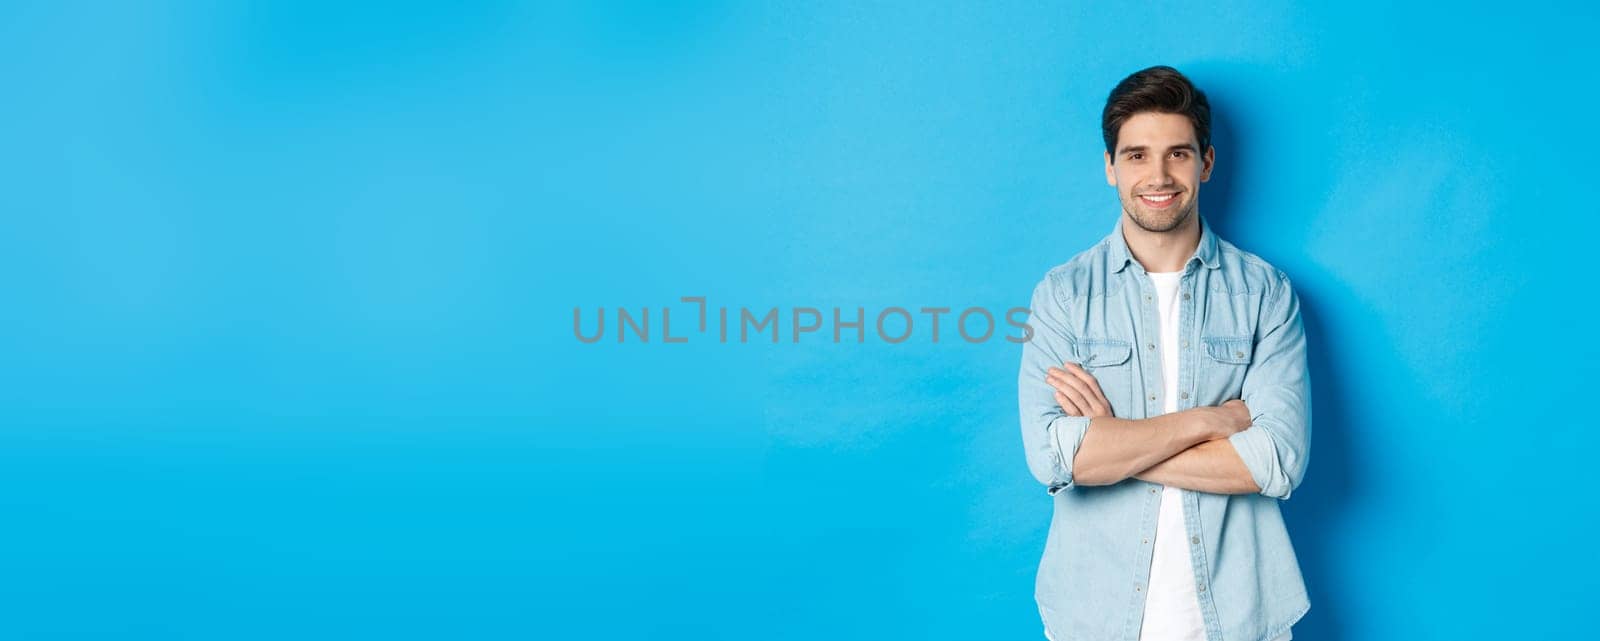 Handsome guy in casual clothes standing with arms crossed and confident smile against blue background.